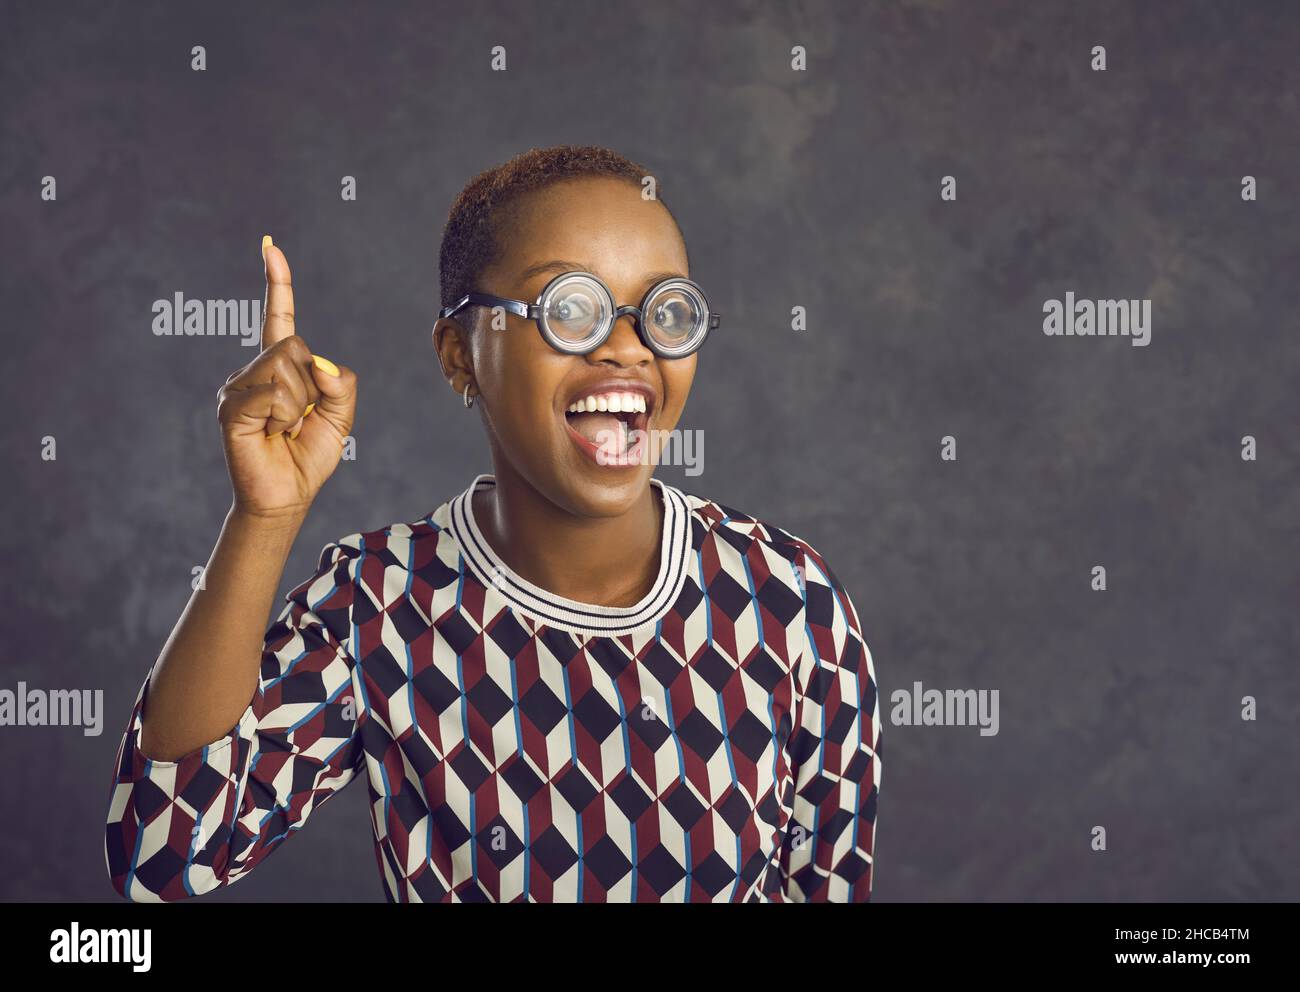 Cheerful woman in funny glasses raises her index finger to indicate that she has an idea or thought. Stock Photo